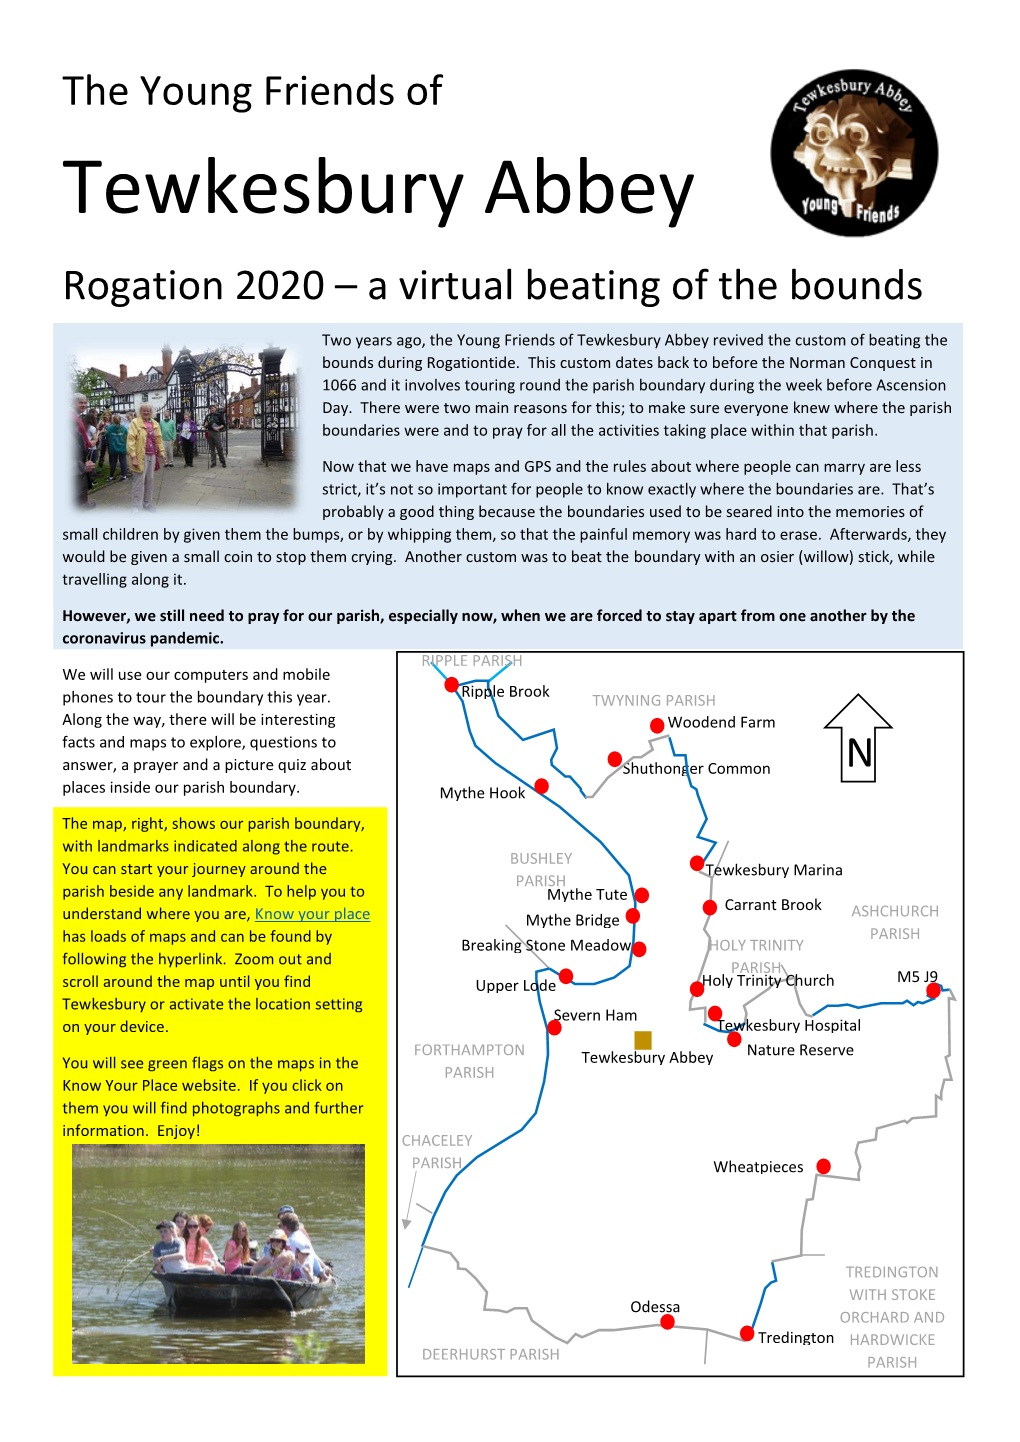 Tewkesbury Abbey Rogation 2020 – a Virtual Beating of the Bounds